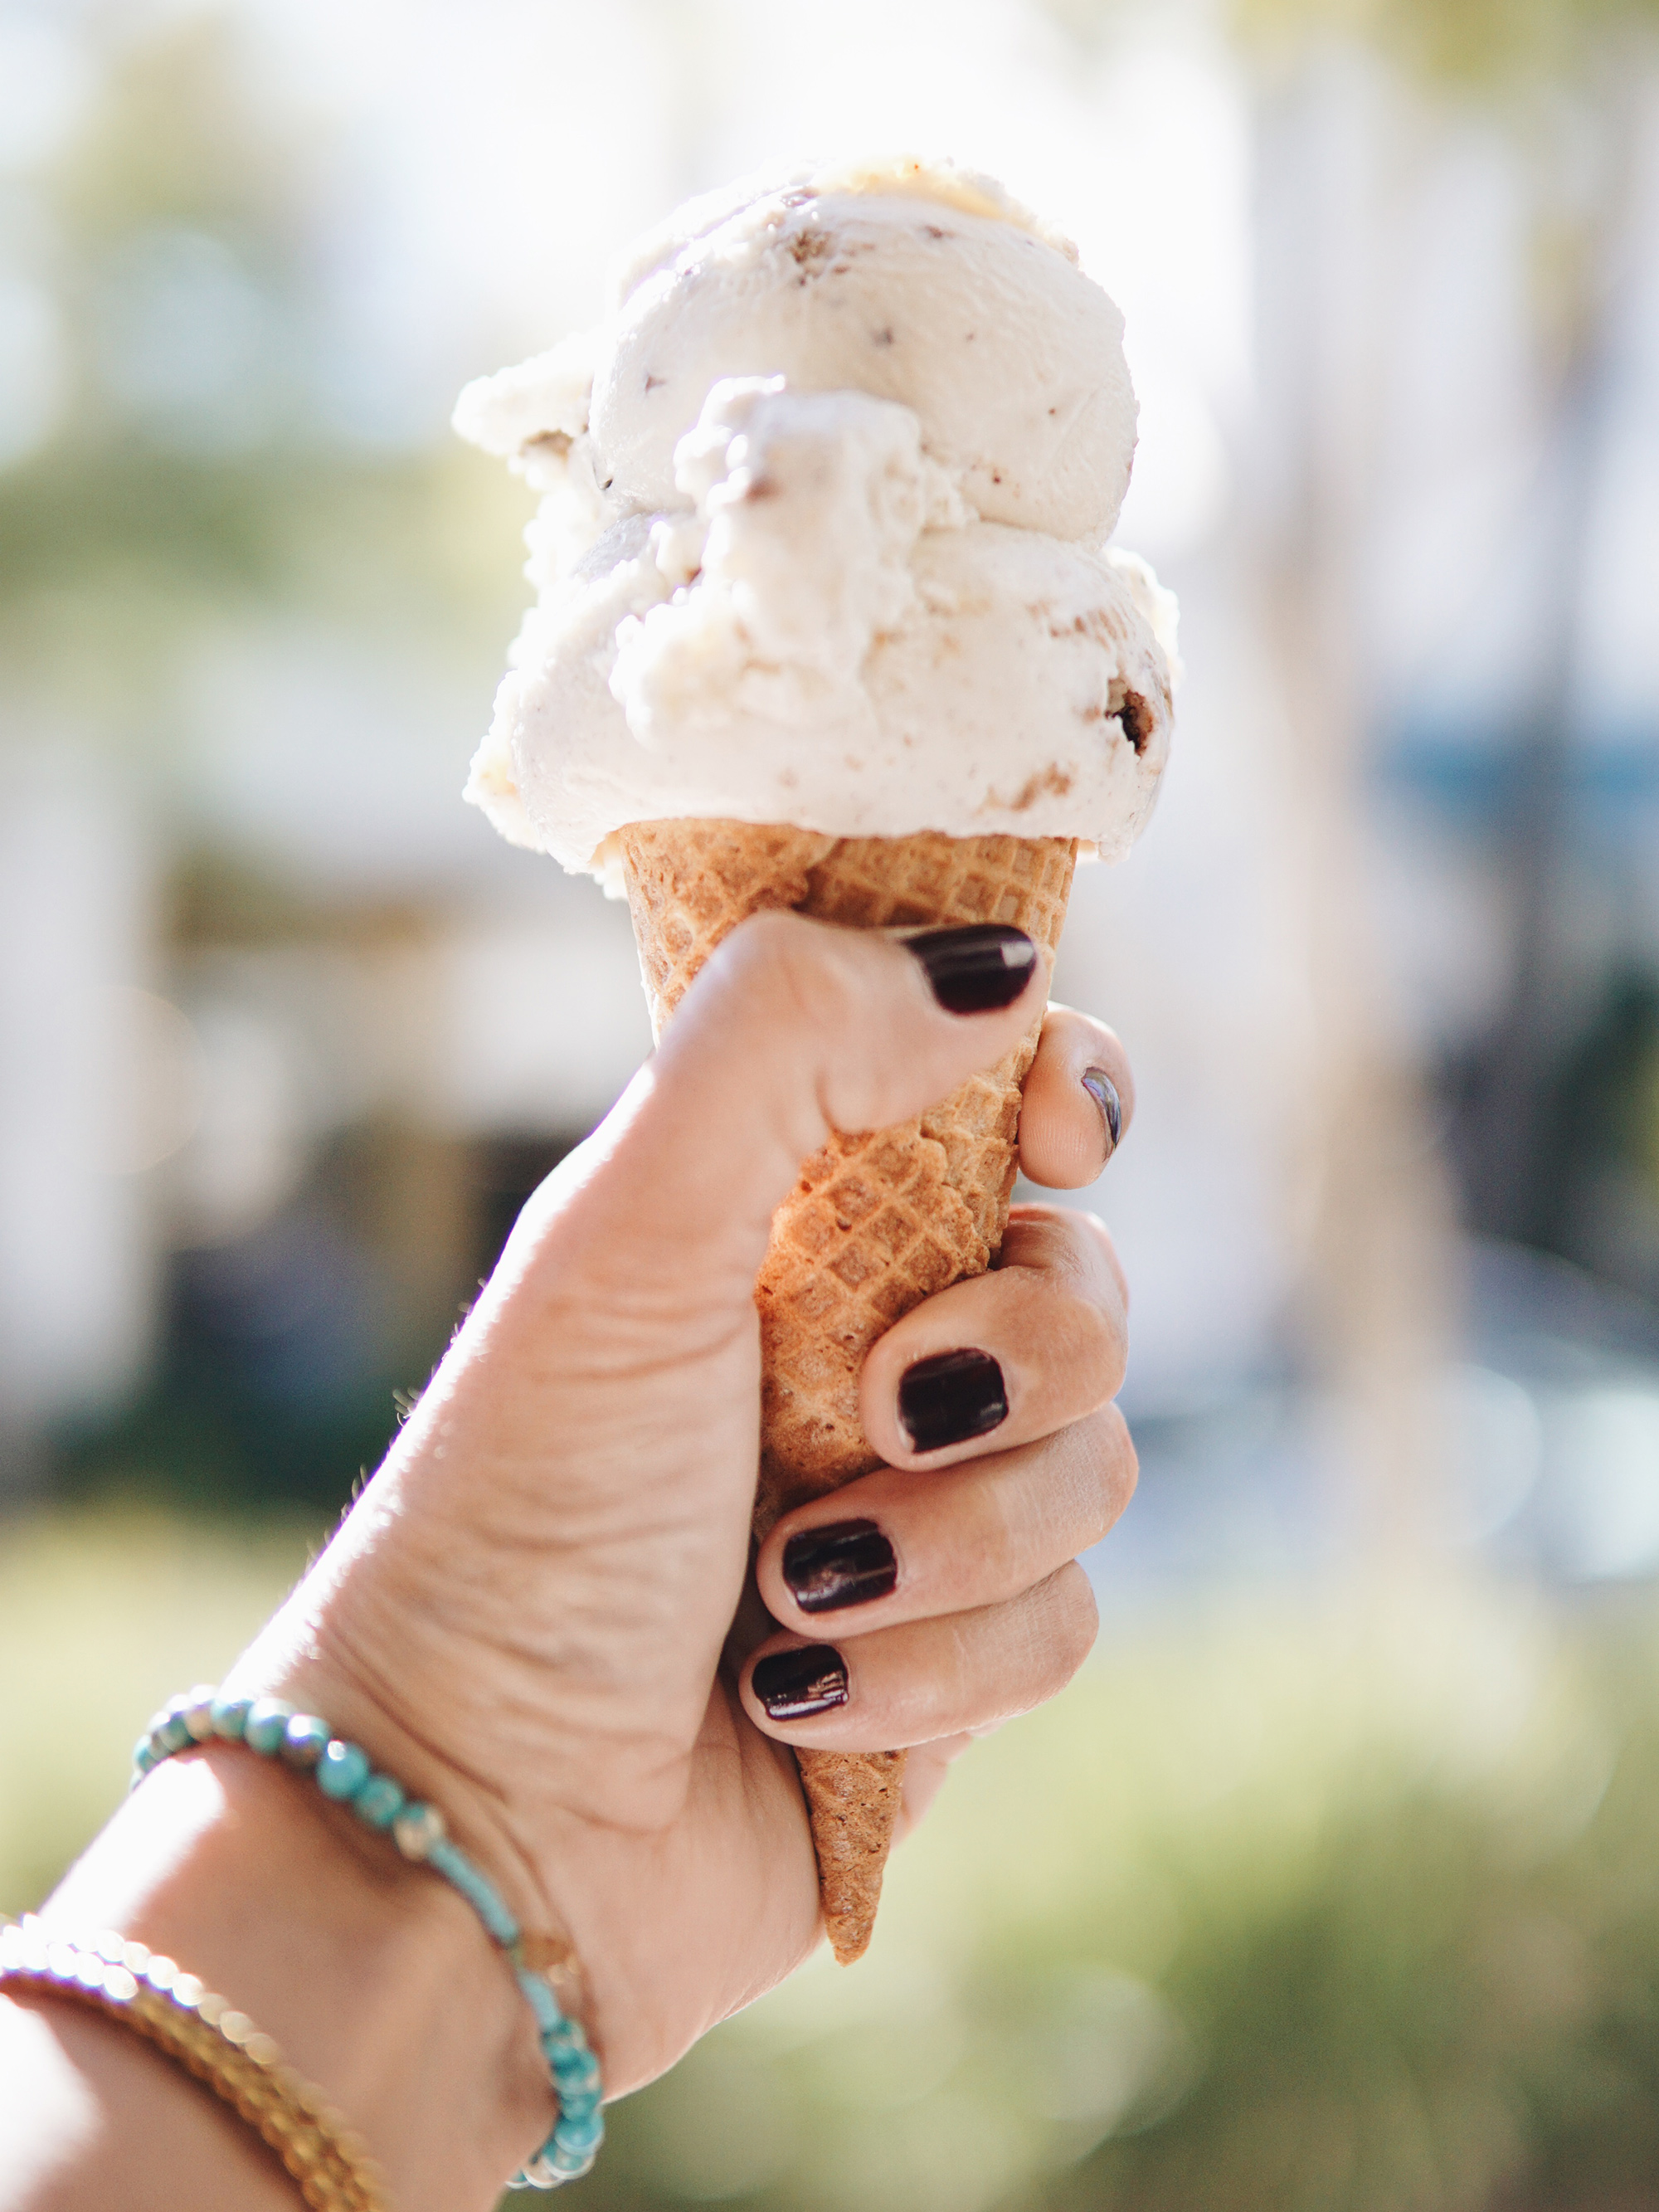 Gingersnap &amp; Cardamom = heaven on a cone.